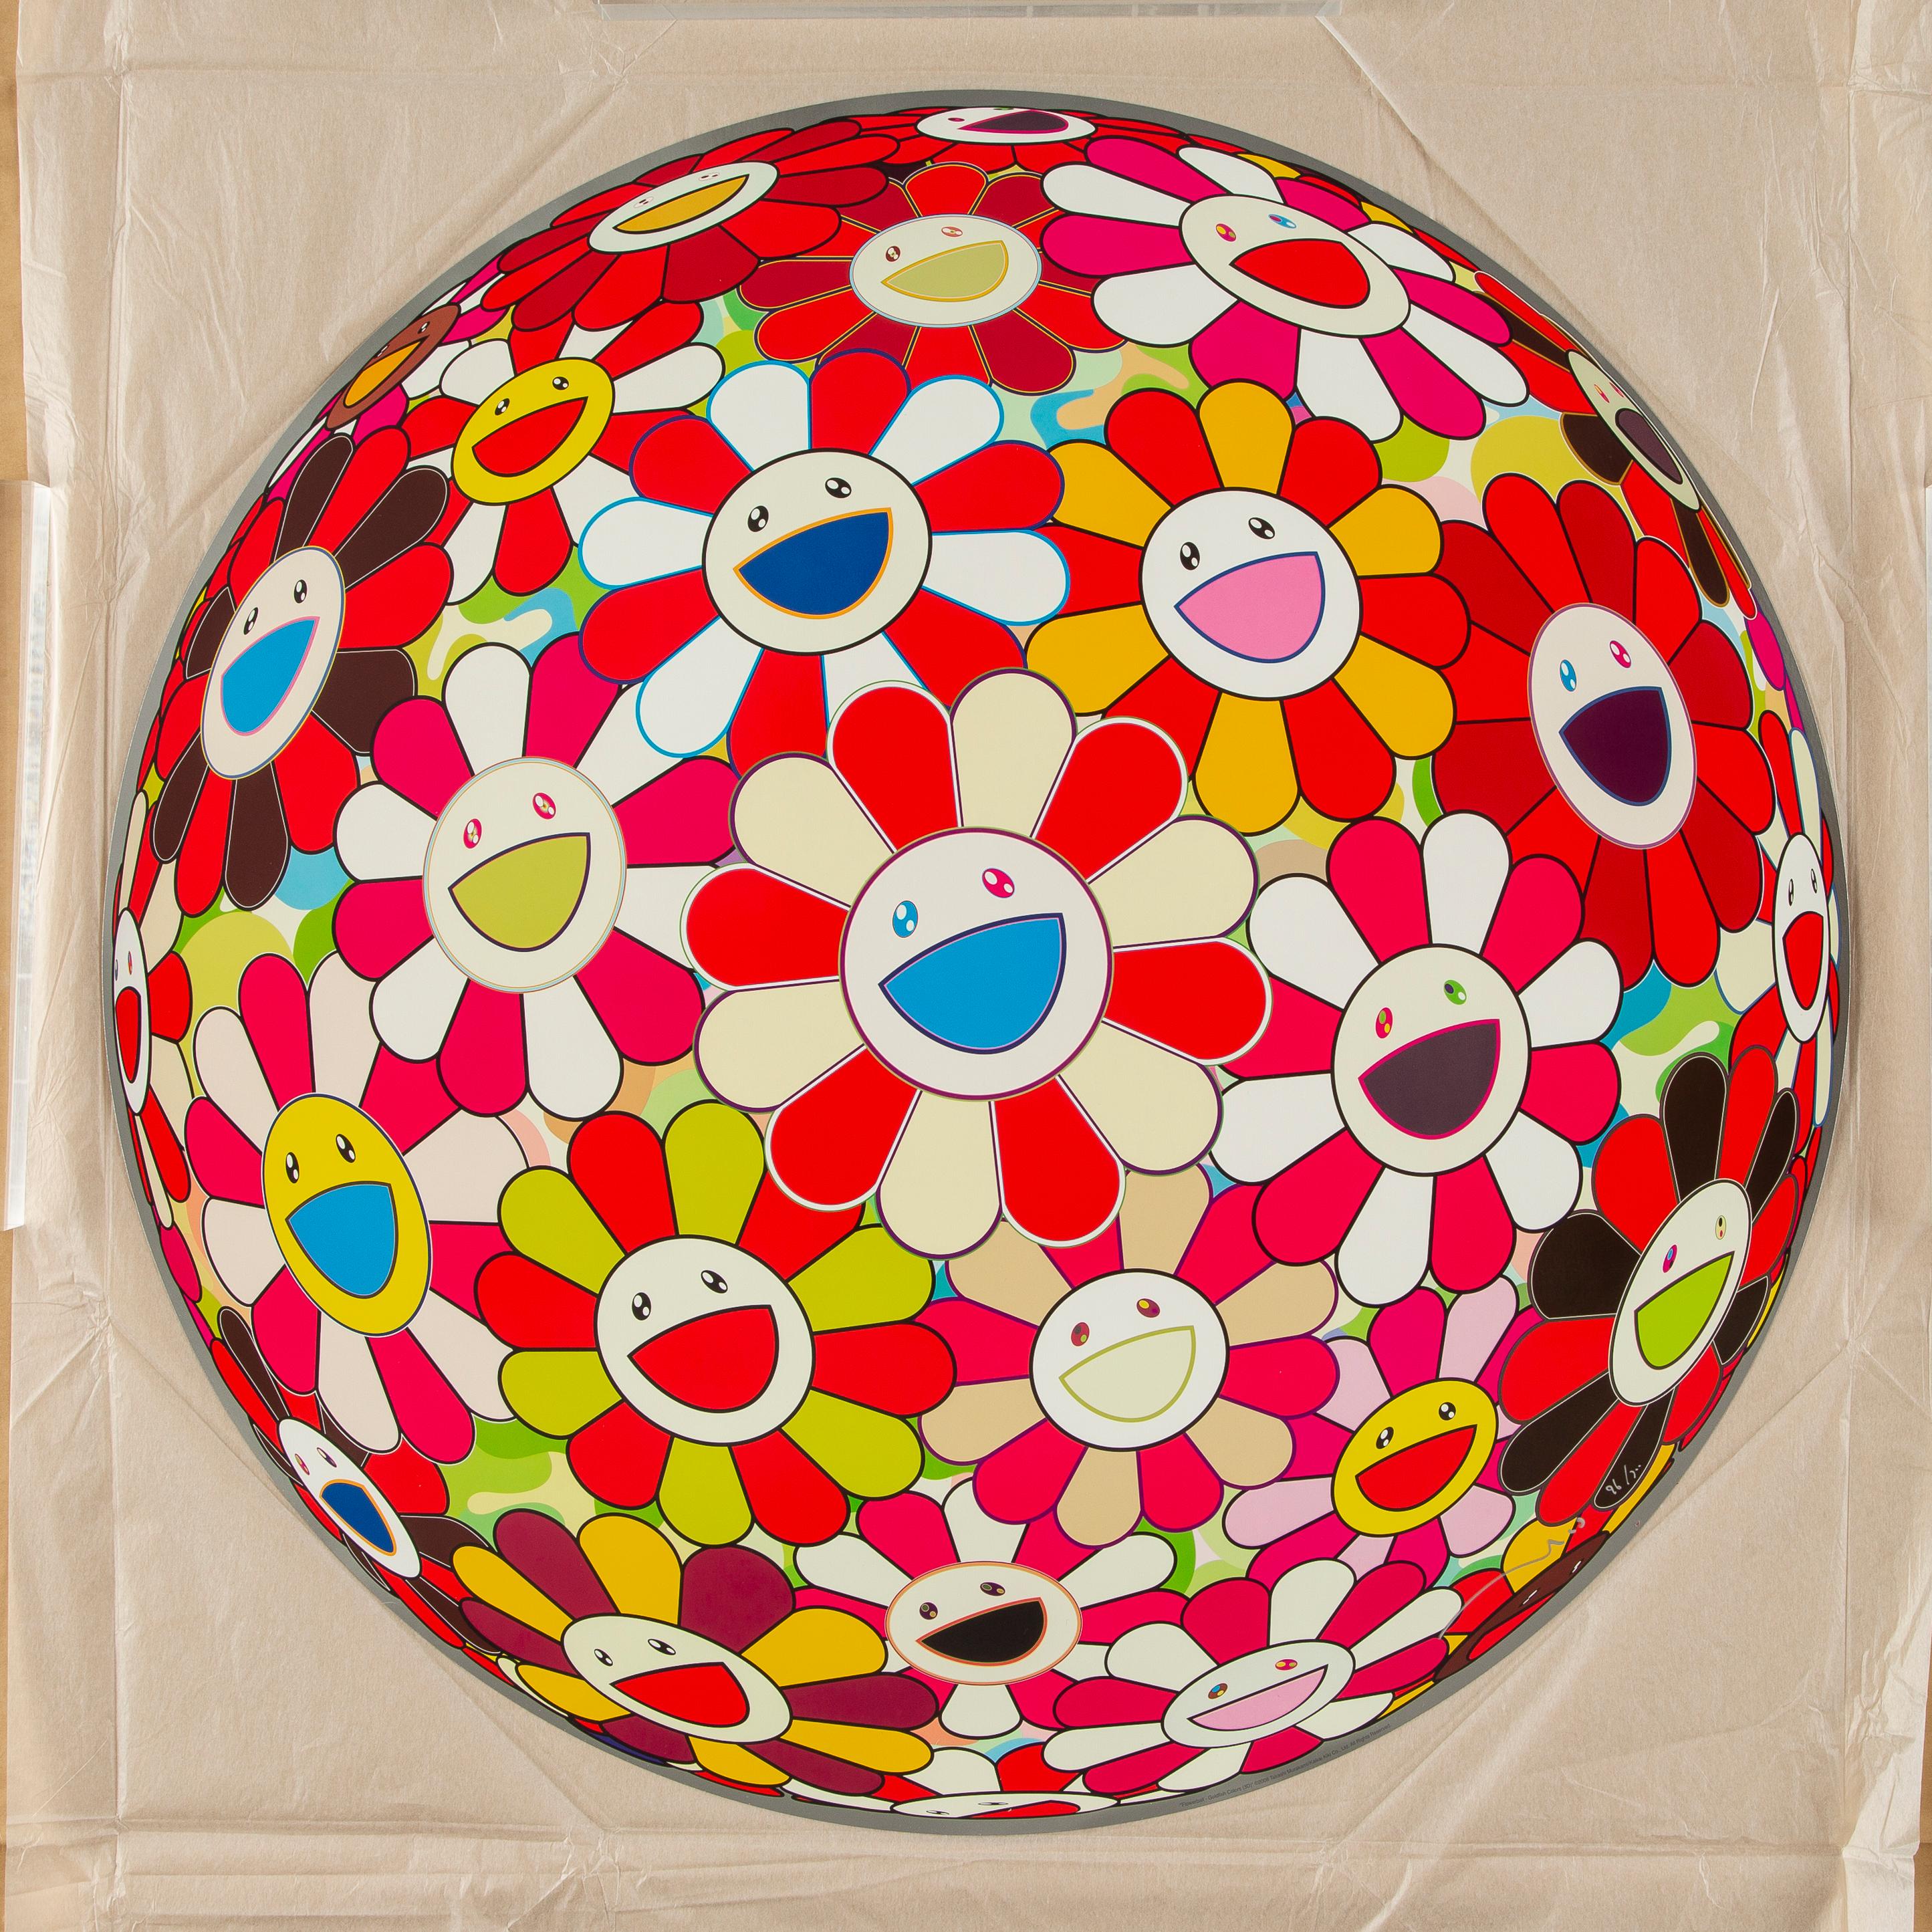 Flower Ball-Goldfish Colors (3D). Limited Edition by Murakami signed, numbered - Print by Takashi Murakami